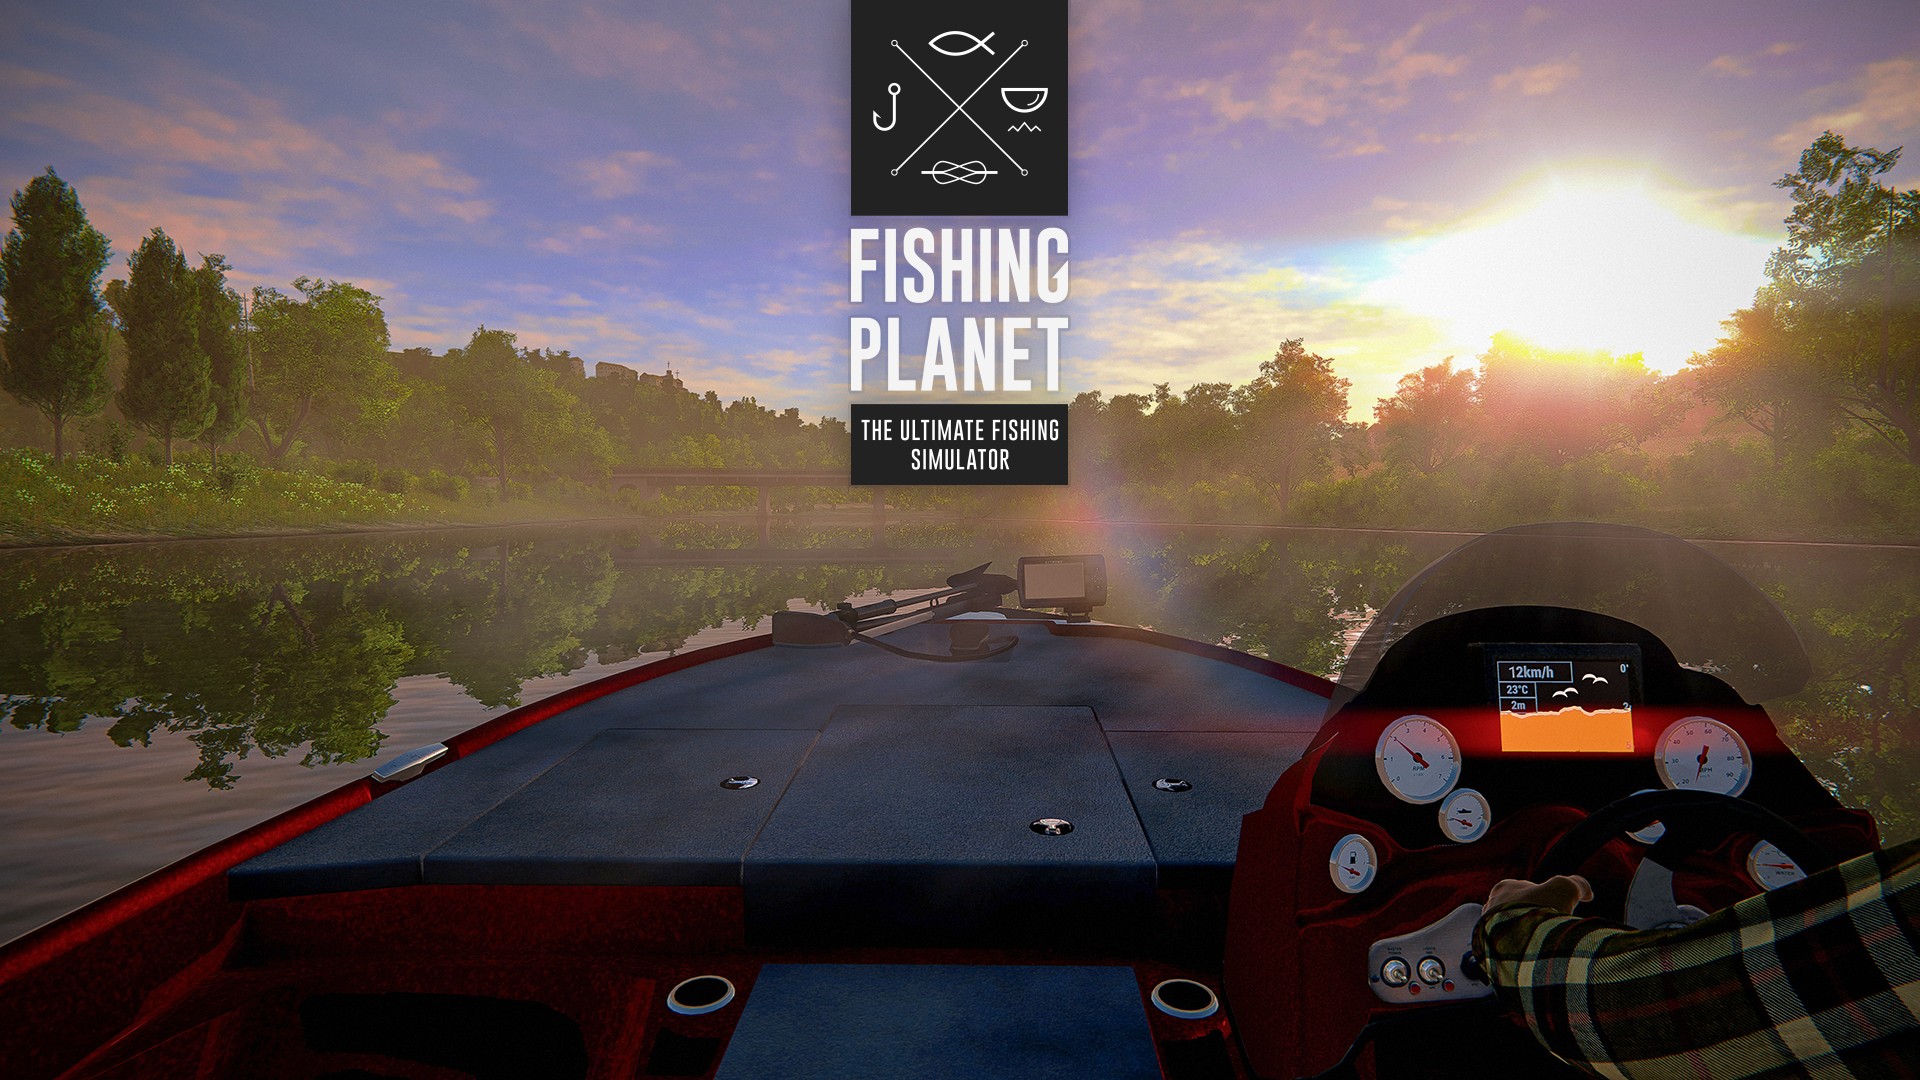 Fishing Update New Motorboats, Waterway, and Fish Xbox Wire